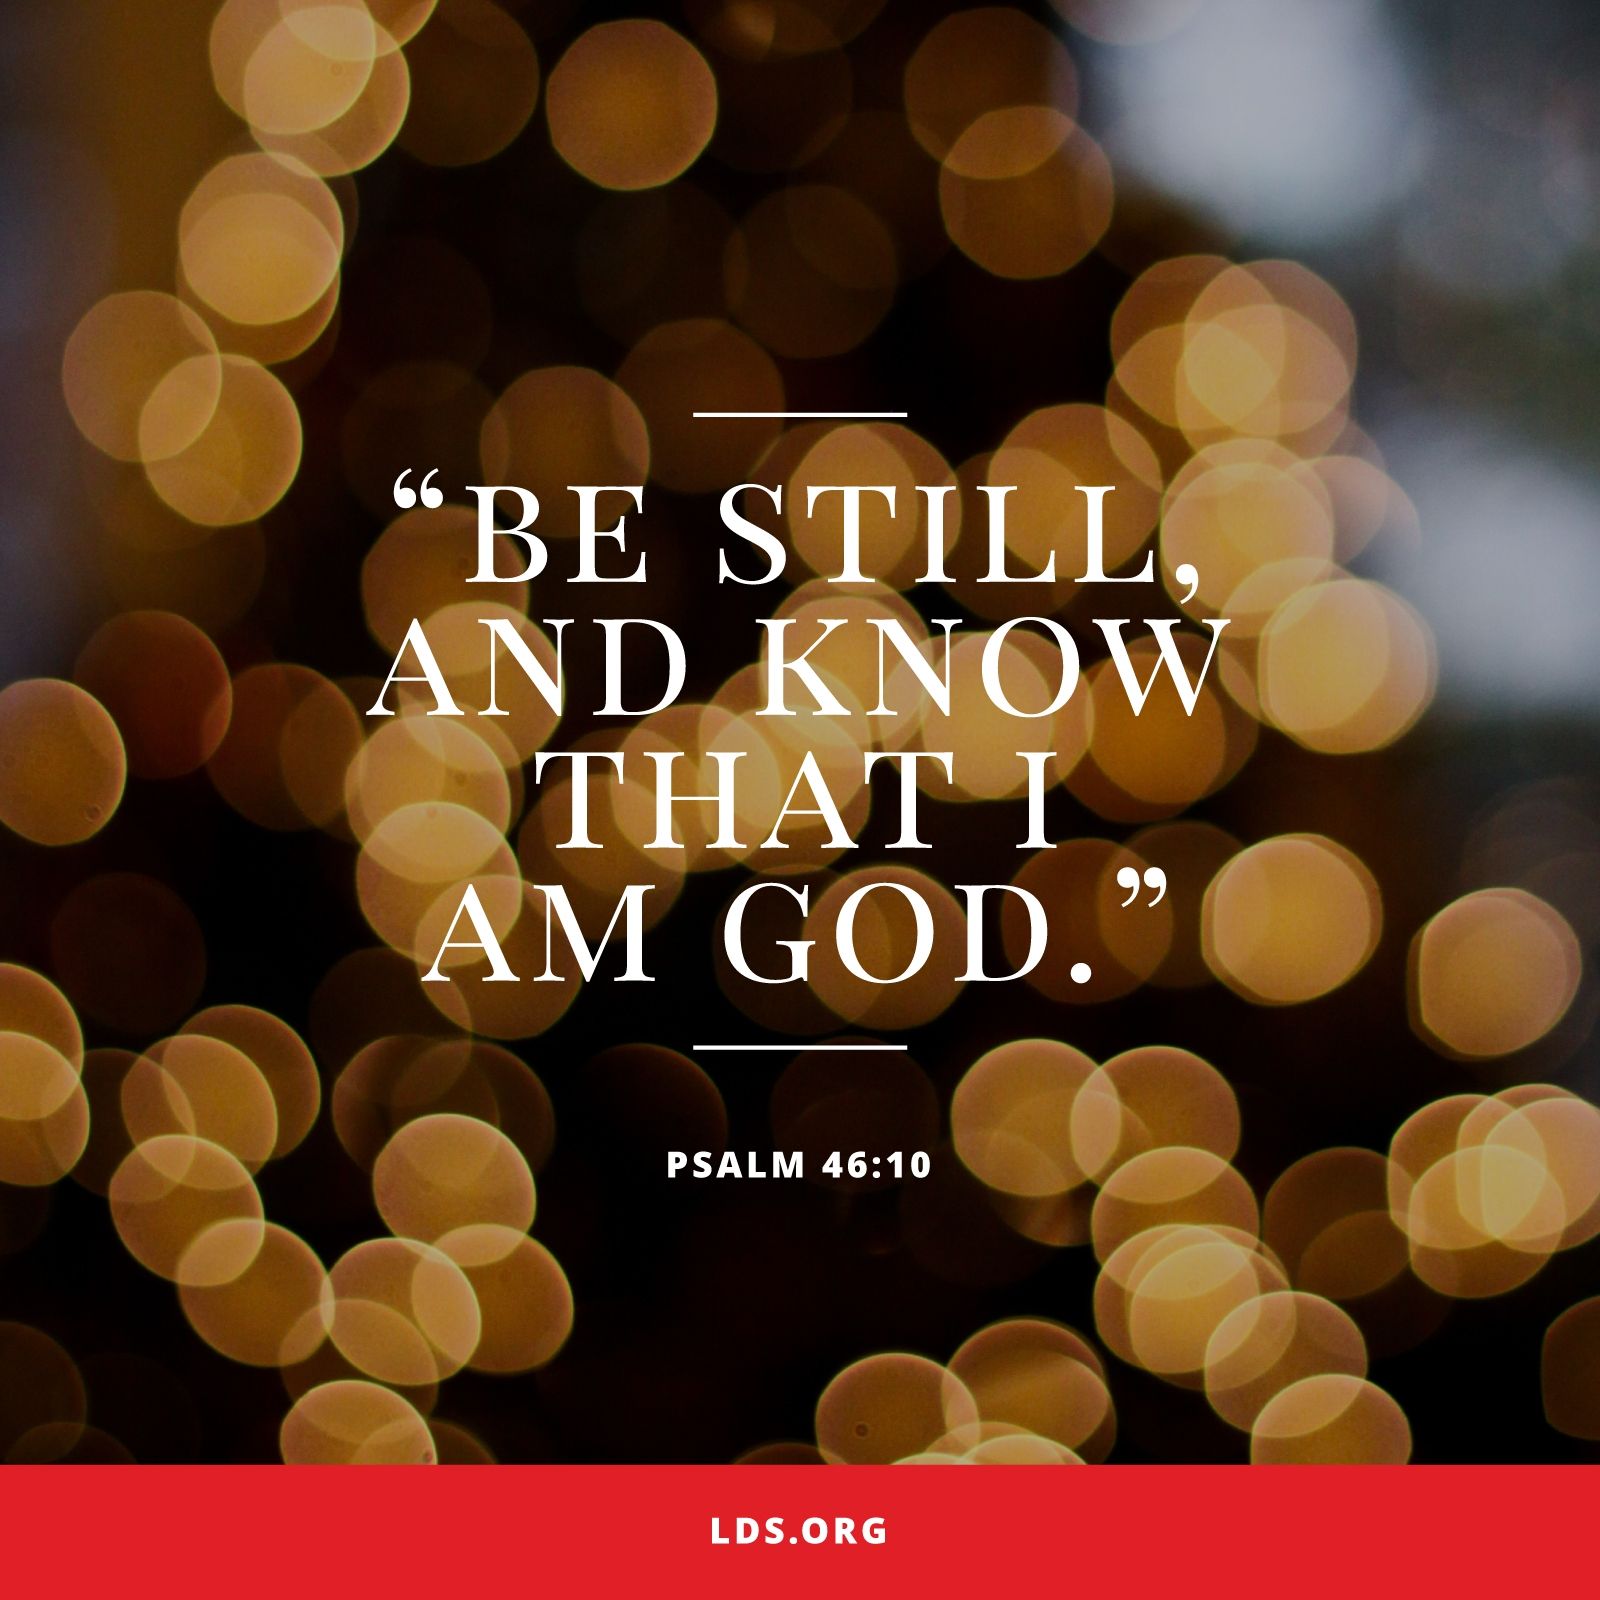 “Be still, and know that I am God.”—Psalm 46:10